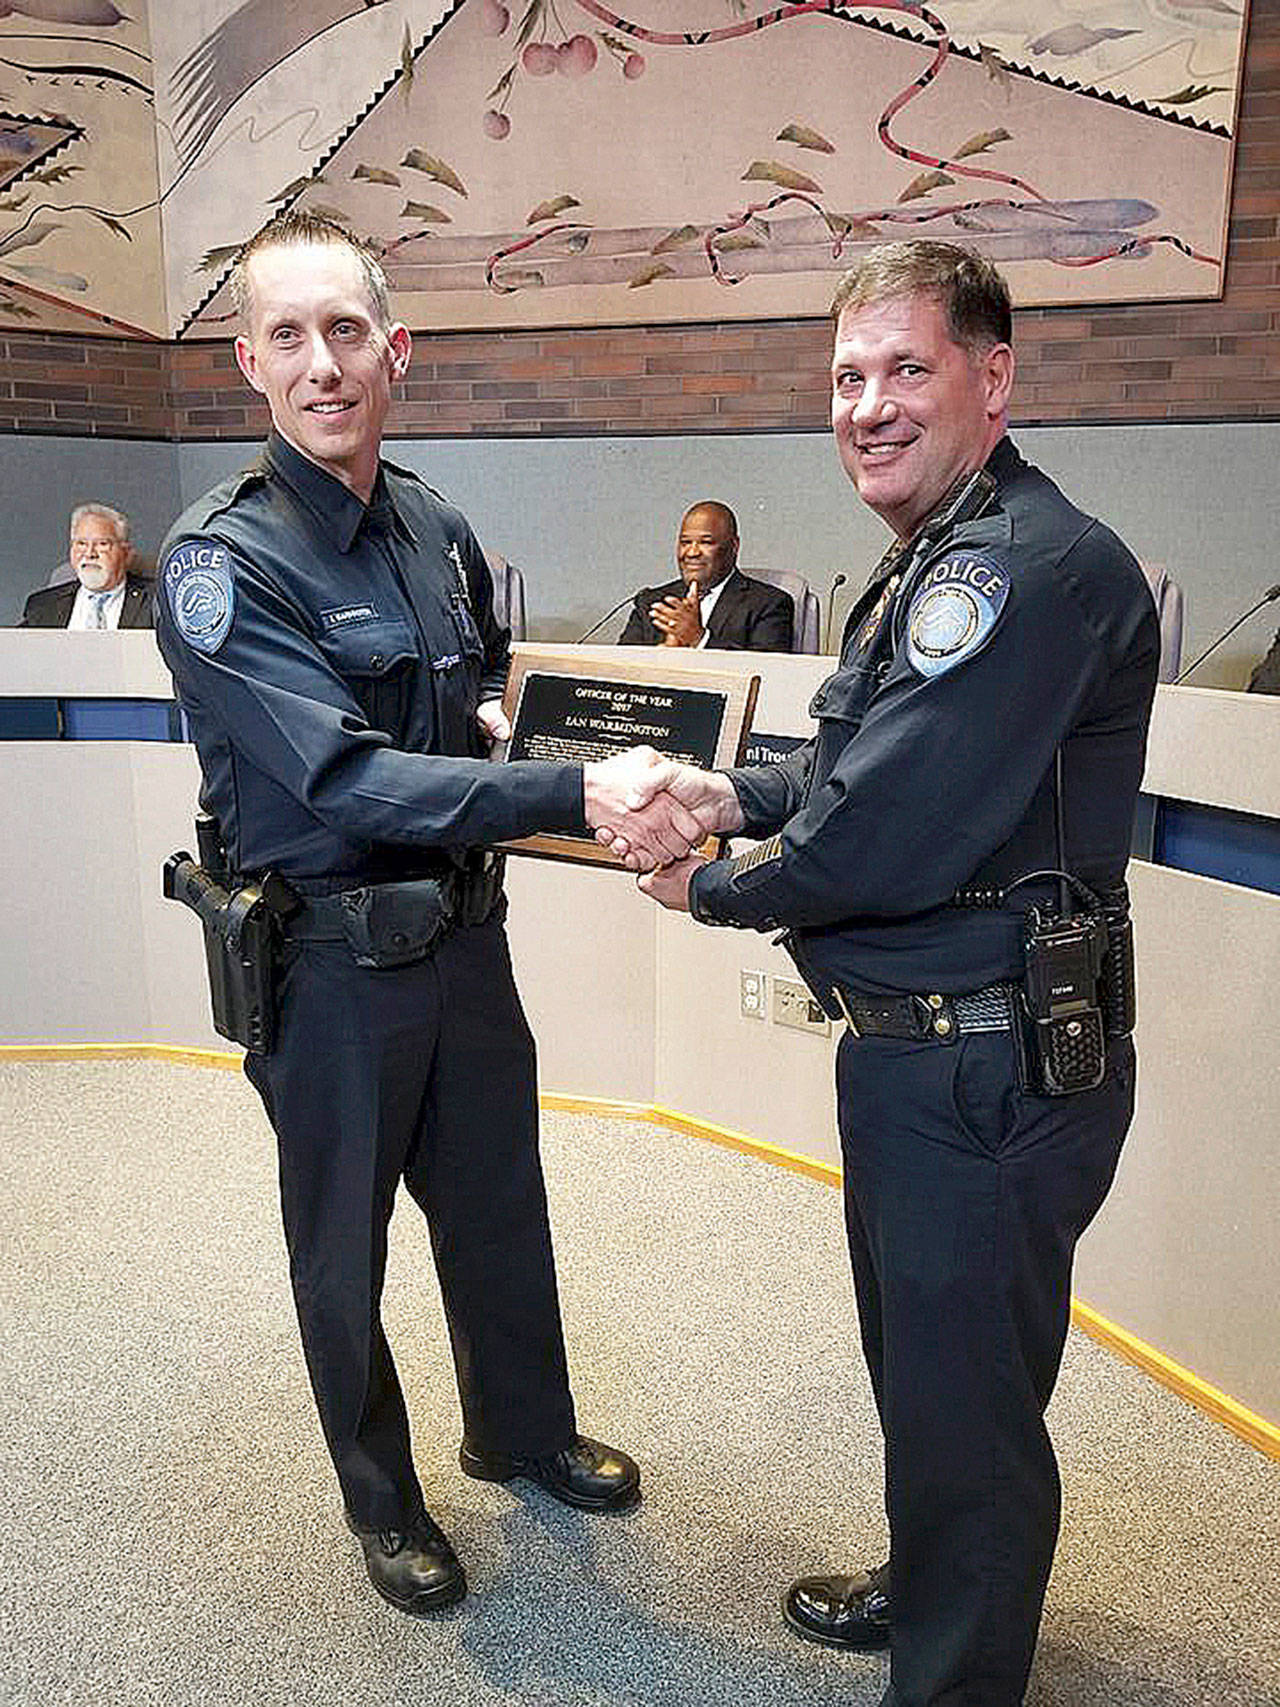 Ian Warmington, left, receives the Kent Police 2017 Officer of the Year award from Chief Ken Thomas at the March 20 City Council meeting. COURTESY PHOTO, Kent Police